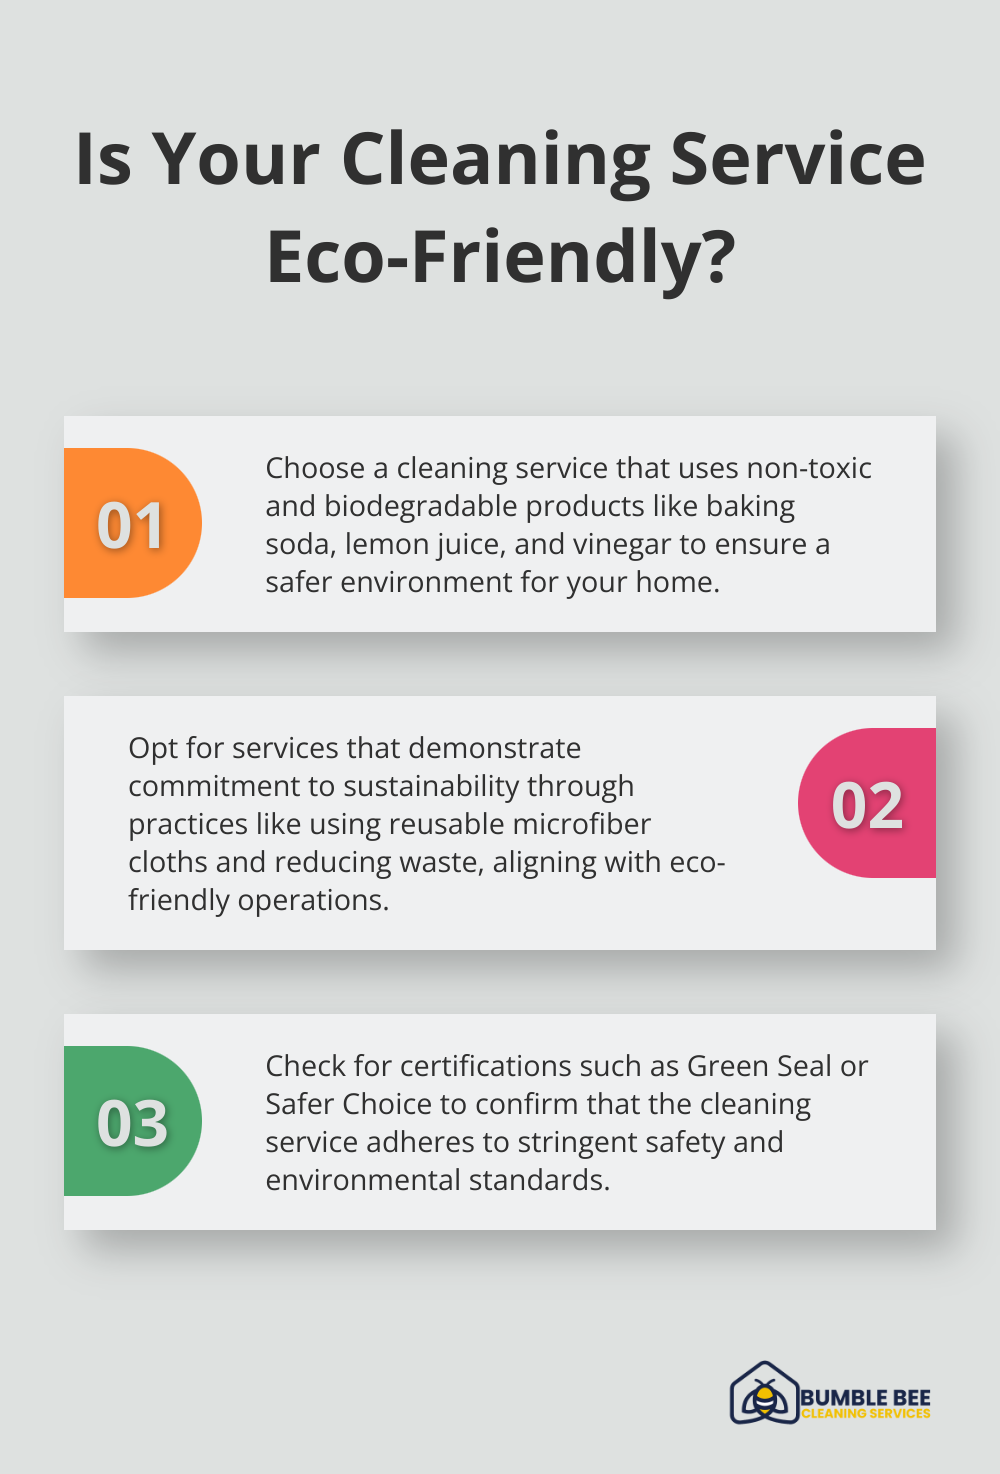 Fact - Is Your Cleaning Service Eco-Friendly?